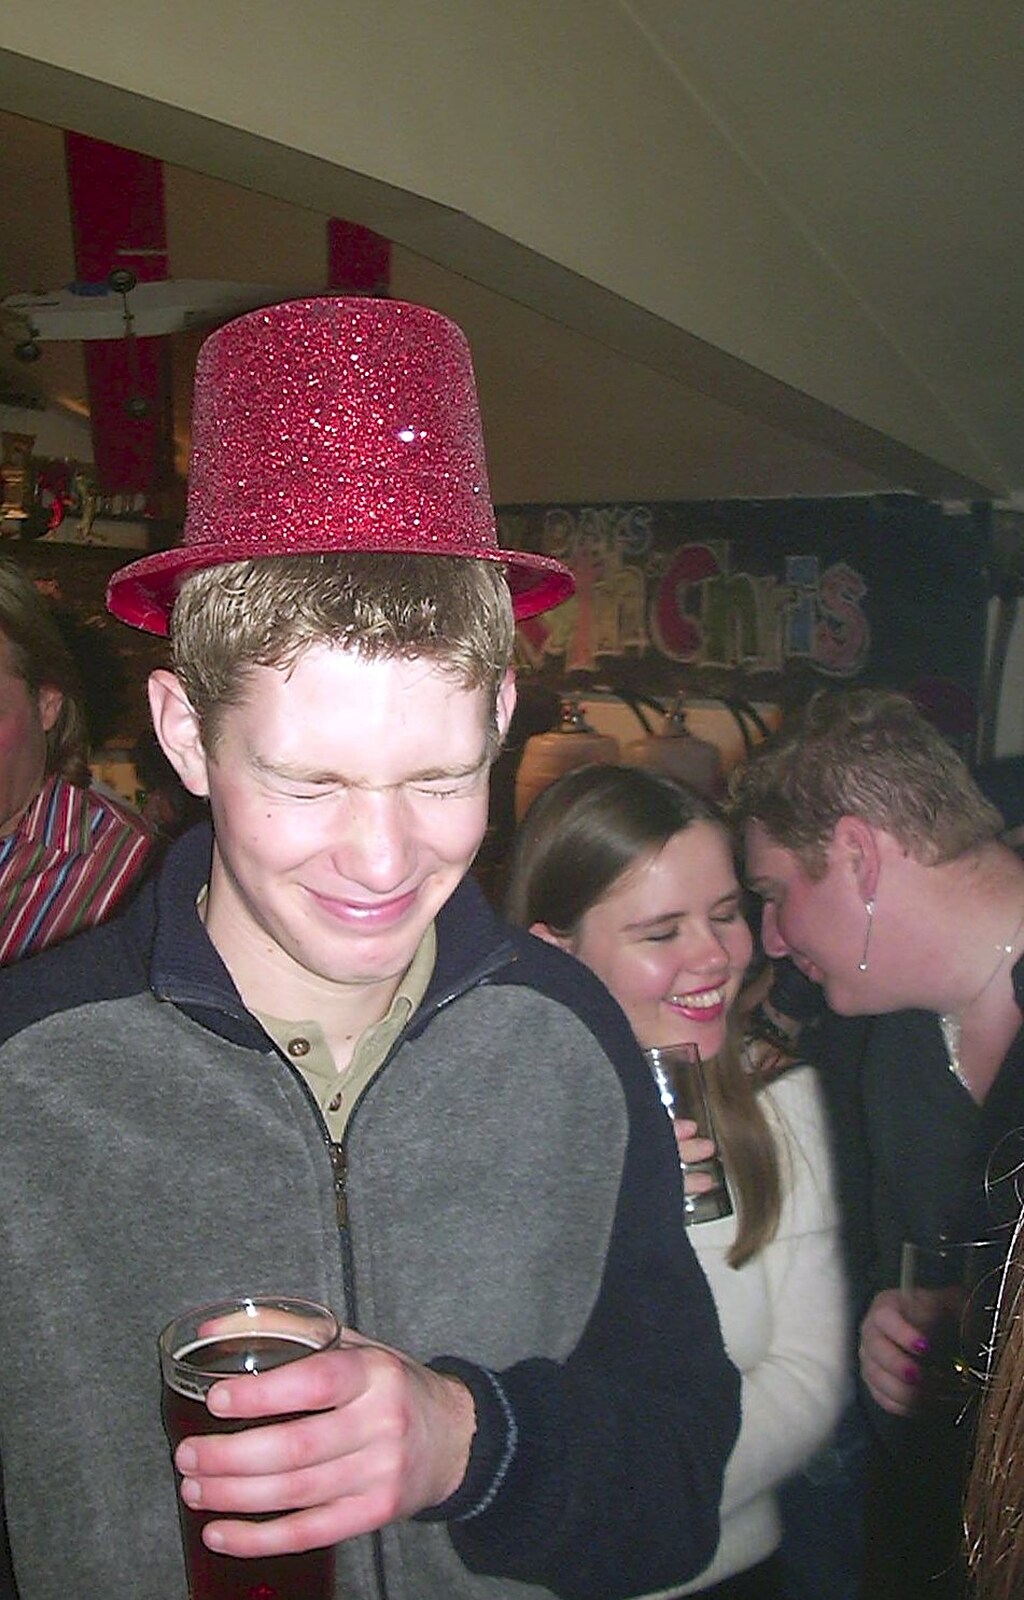 The Boy Phil's not impressed with the sparkly hat from The BBs do New Year's Eve at The Cider Shed, Banham, Norfolk - 31st December 2003